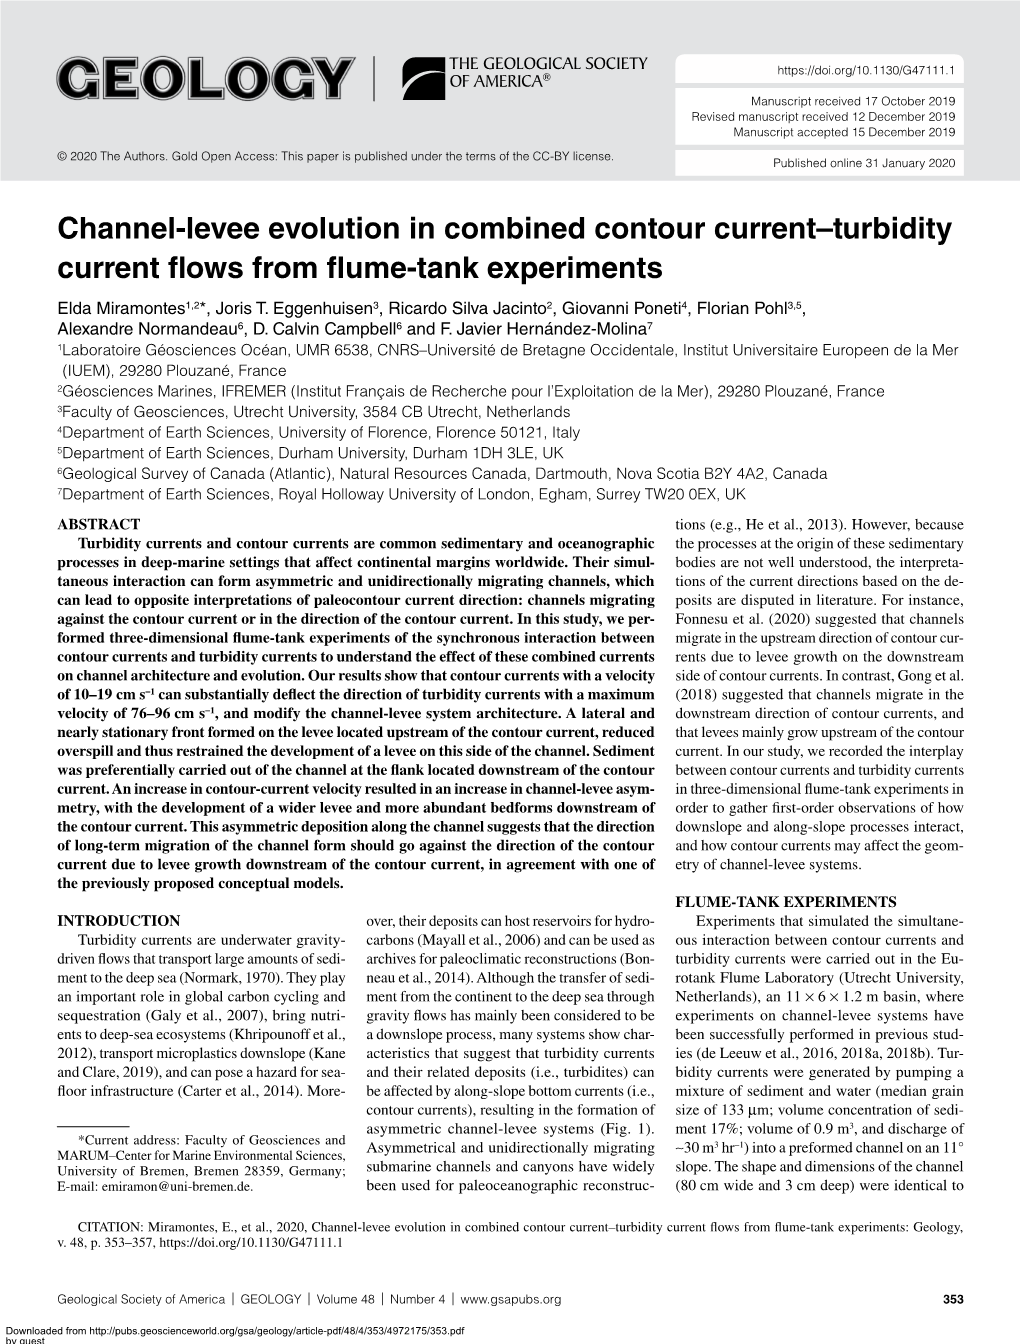 Channel-Levee Evolution in Combined Contour Current–Turbidity Current Flows from Flume-Tank Experiments Elda Miramontes1,2*, Joris T